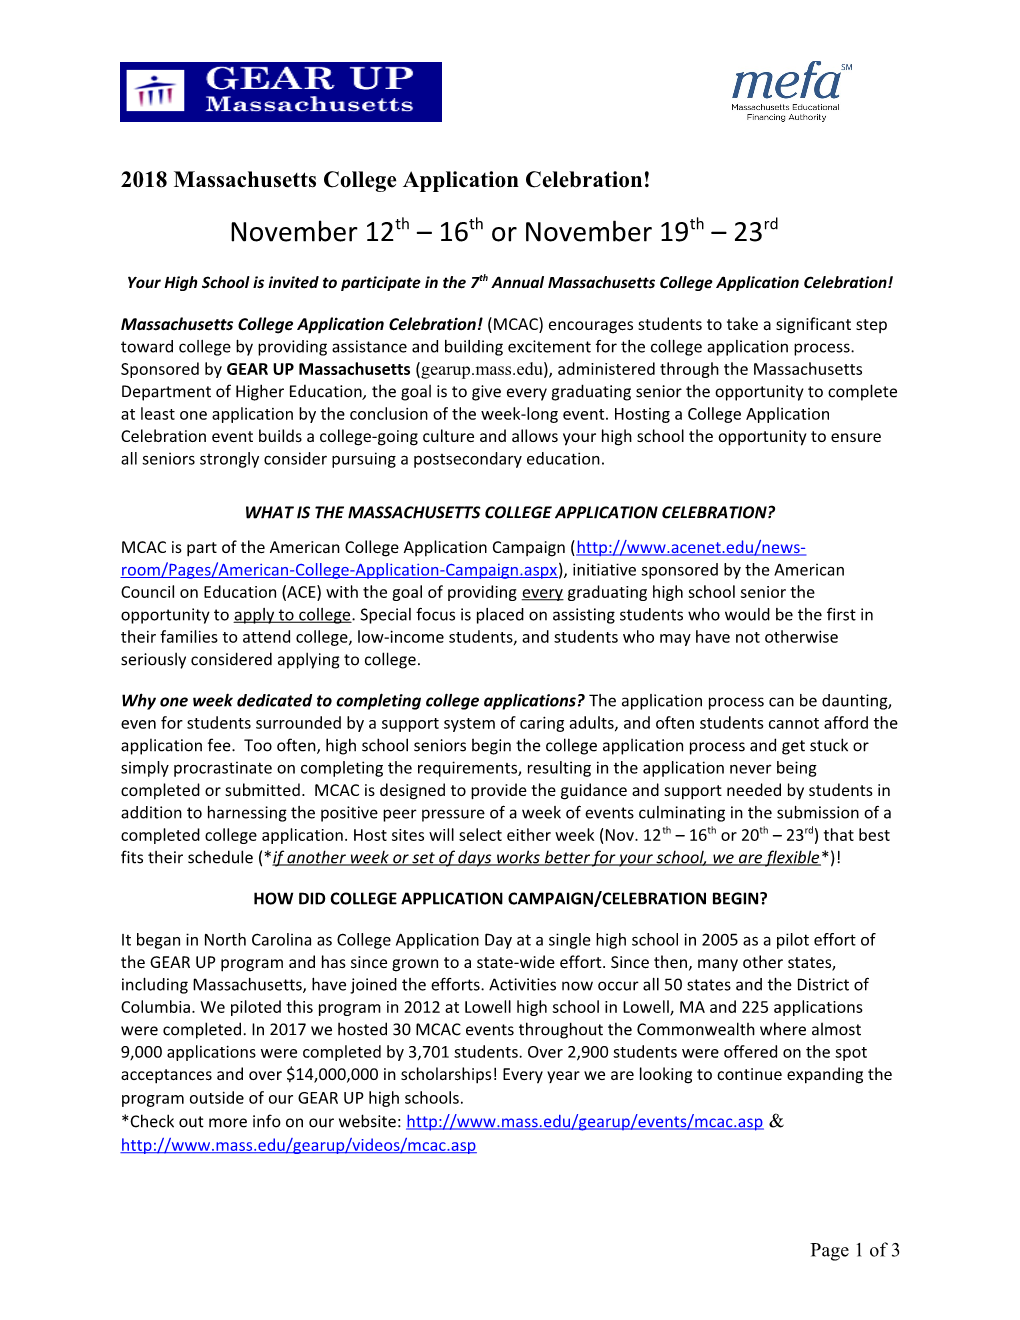 Your High School Is Invited to Participate in the 7Th Annual Massachusetts College Application